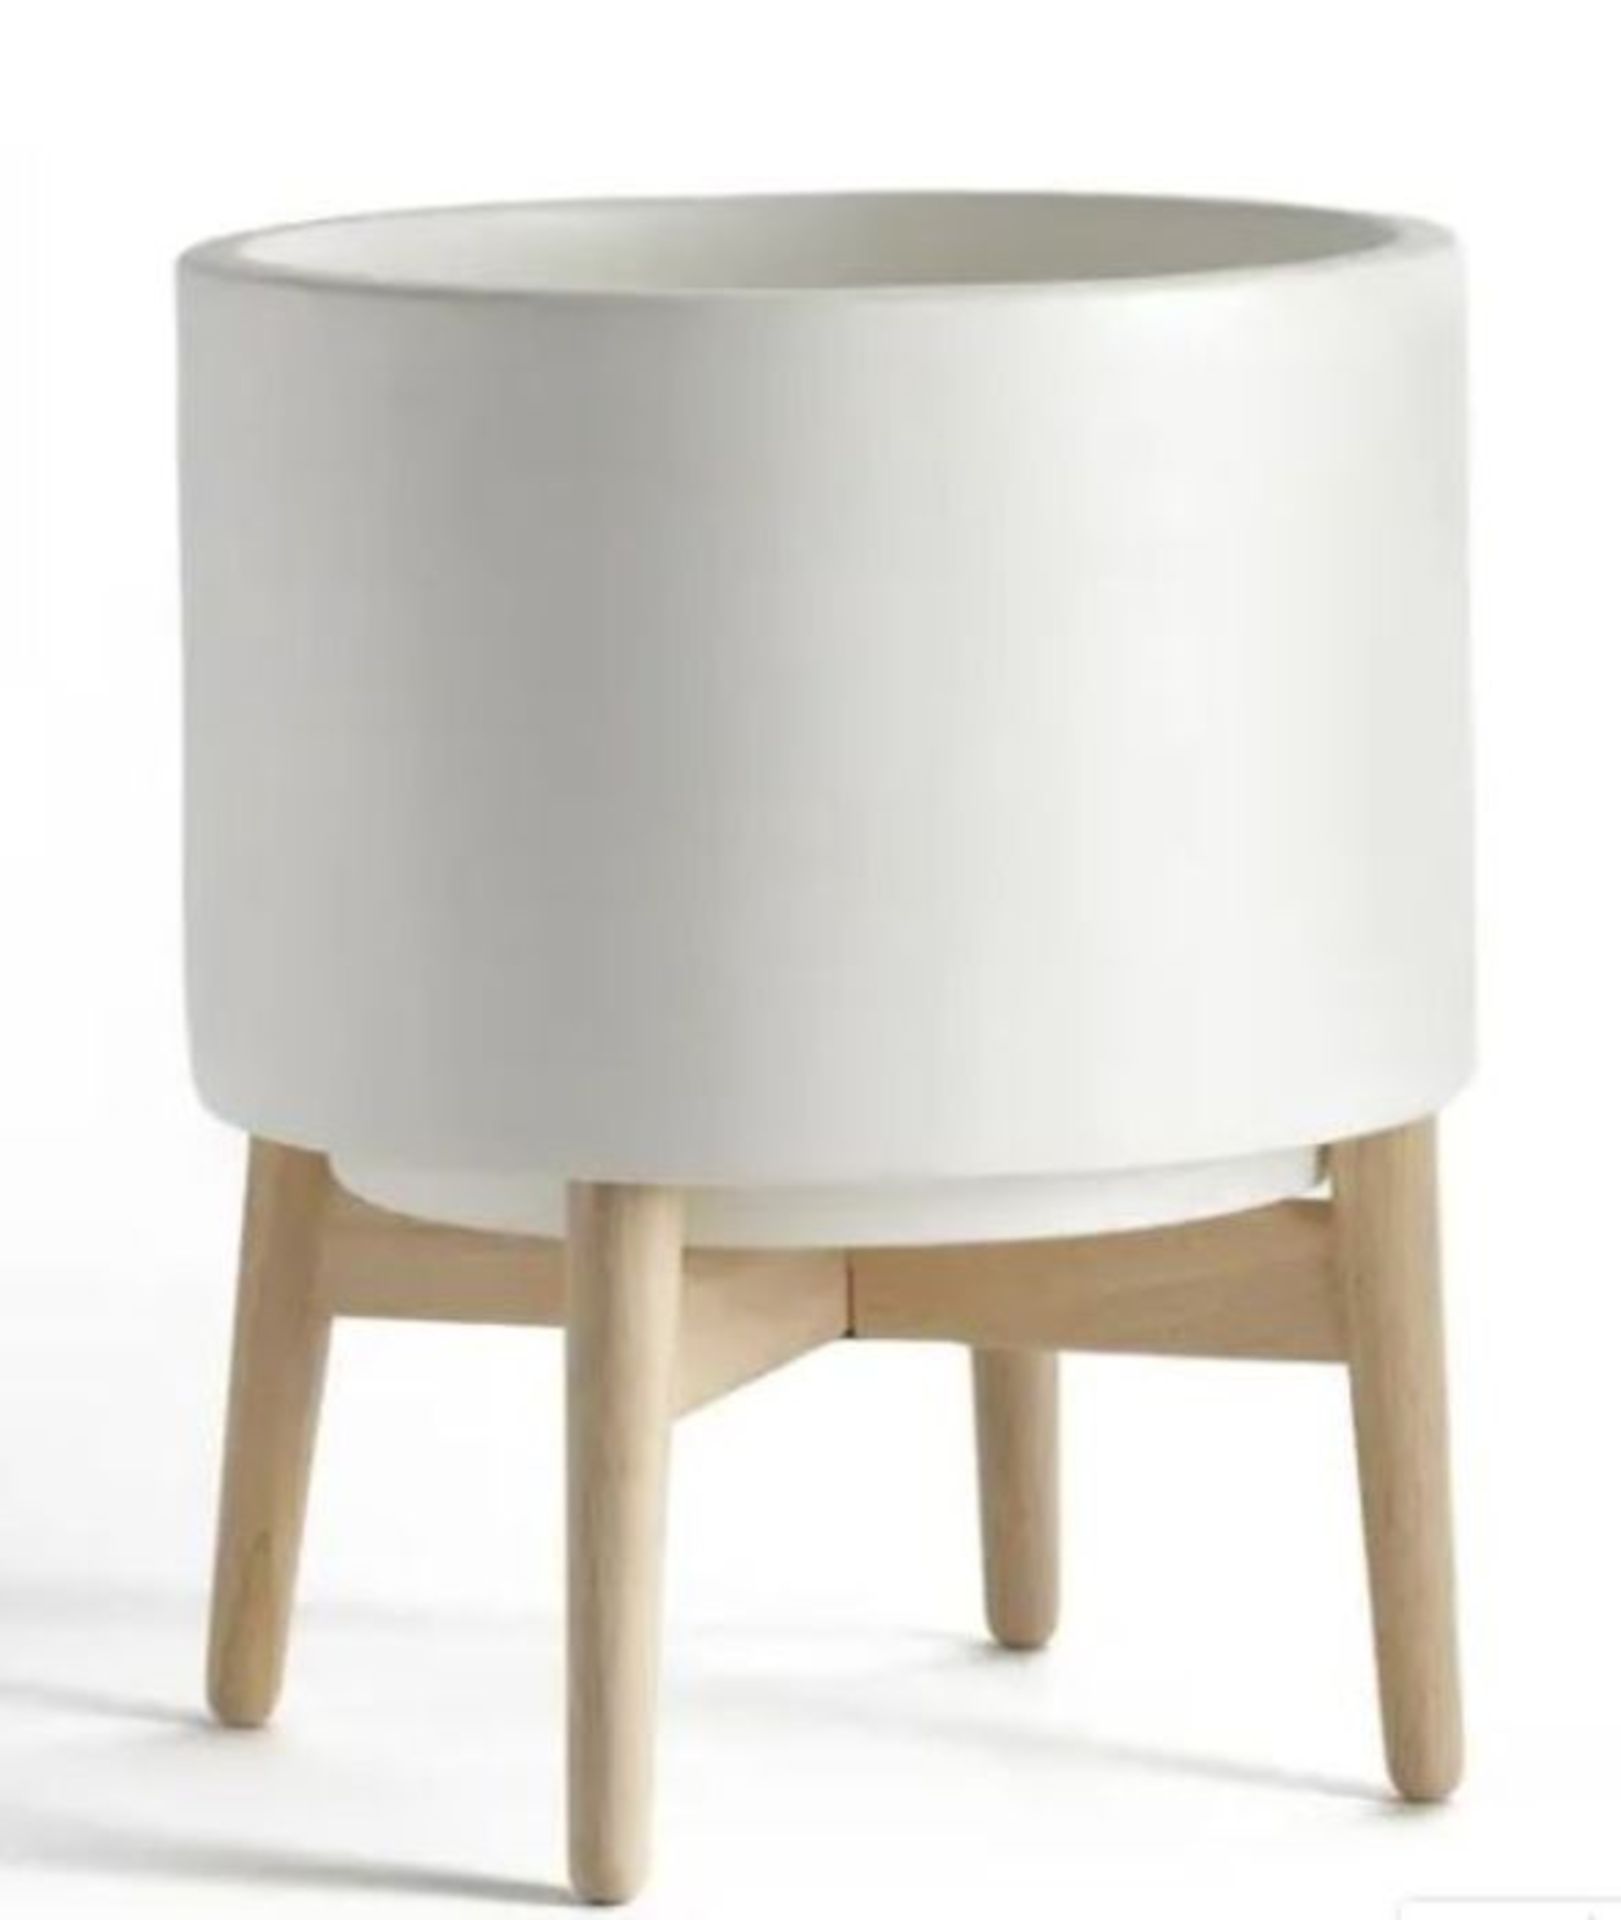 FLORIAN CERAMIC PLANTER WITH WOODEN STAND / RRP £99.00 / GRADE A / CUSTOMER RETURN